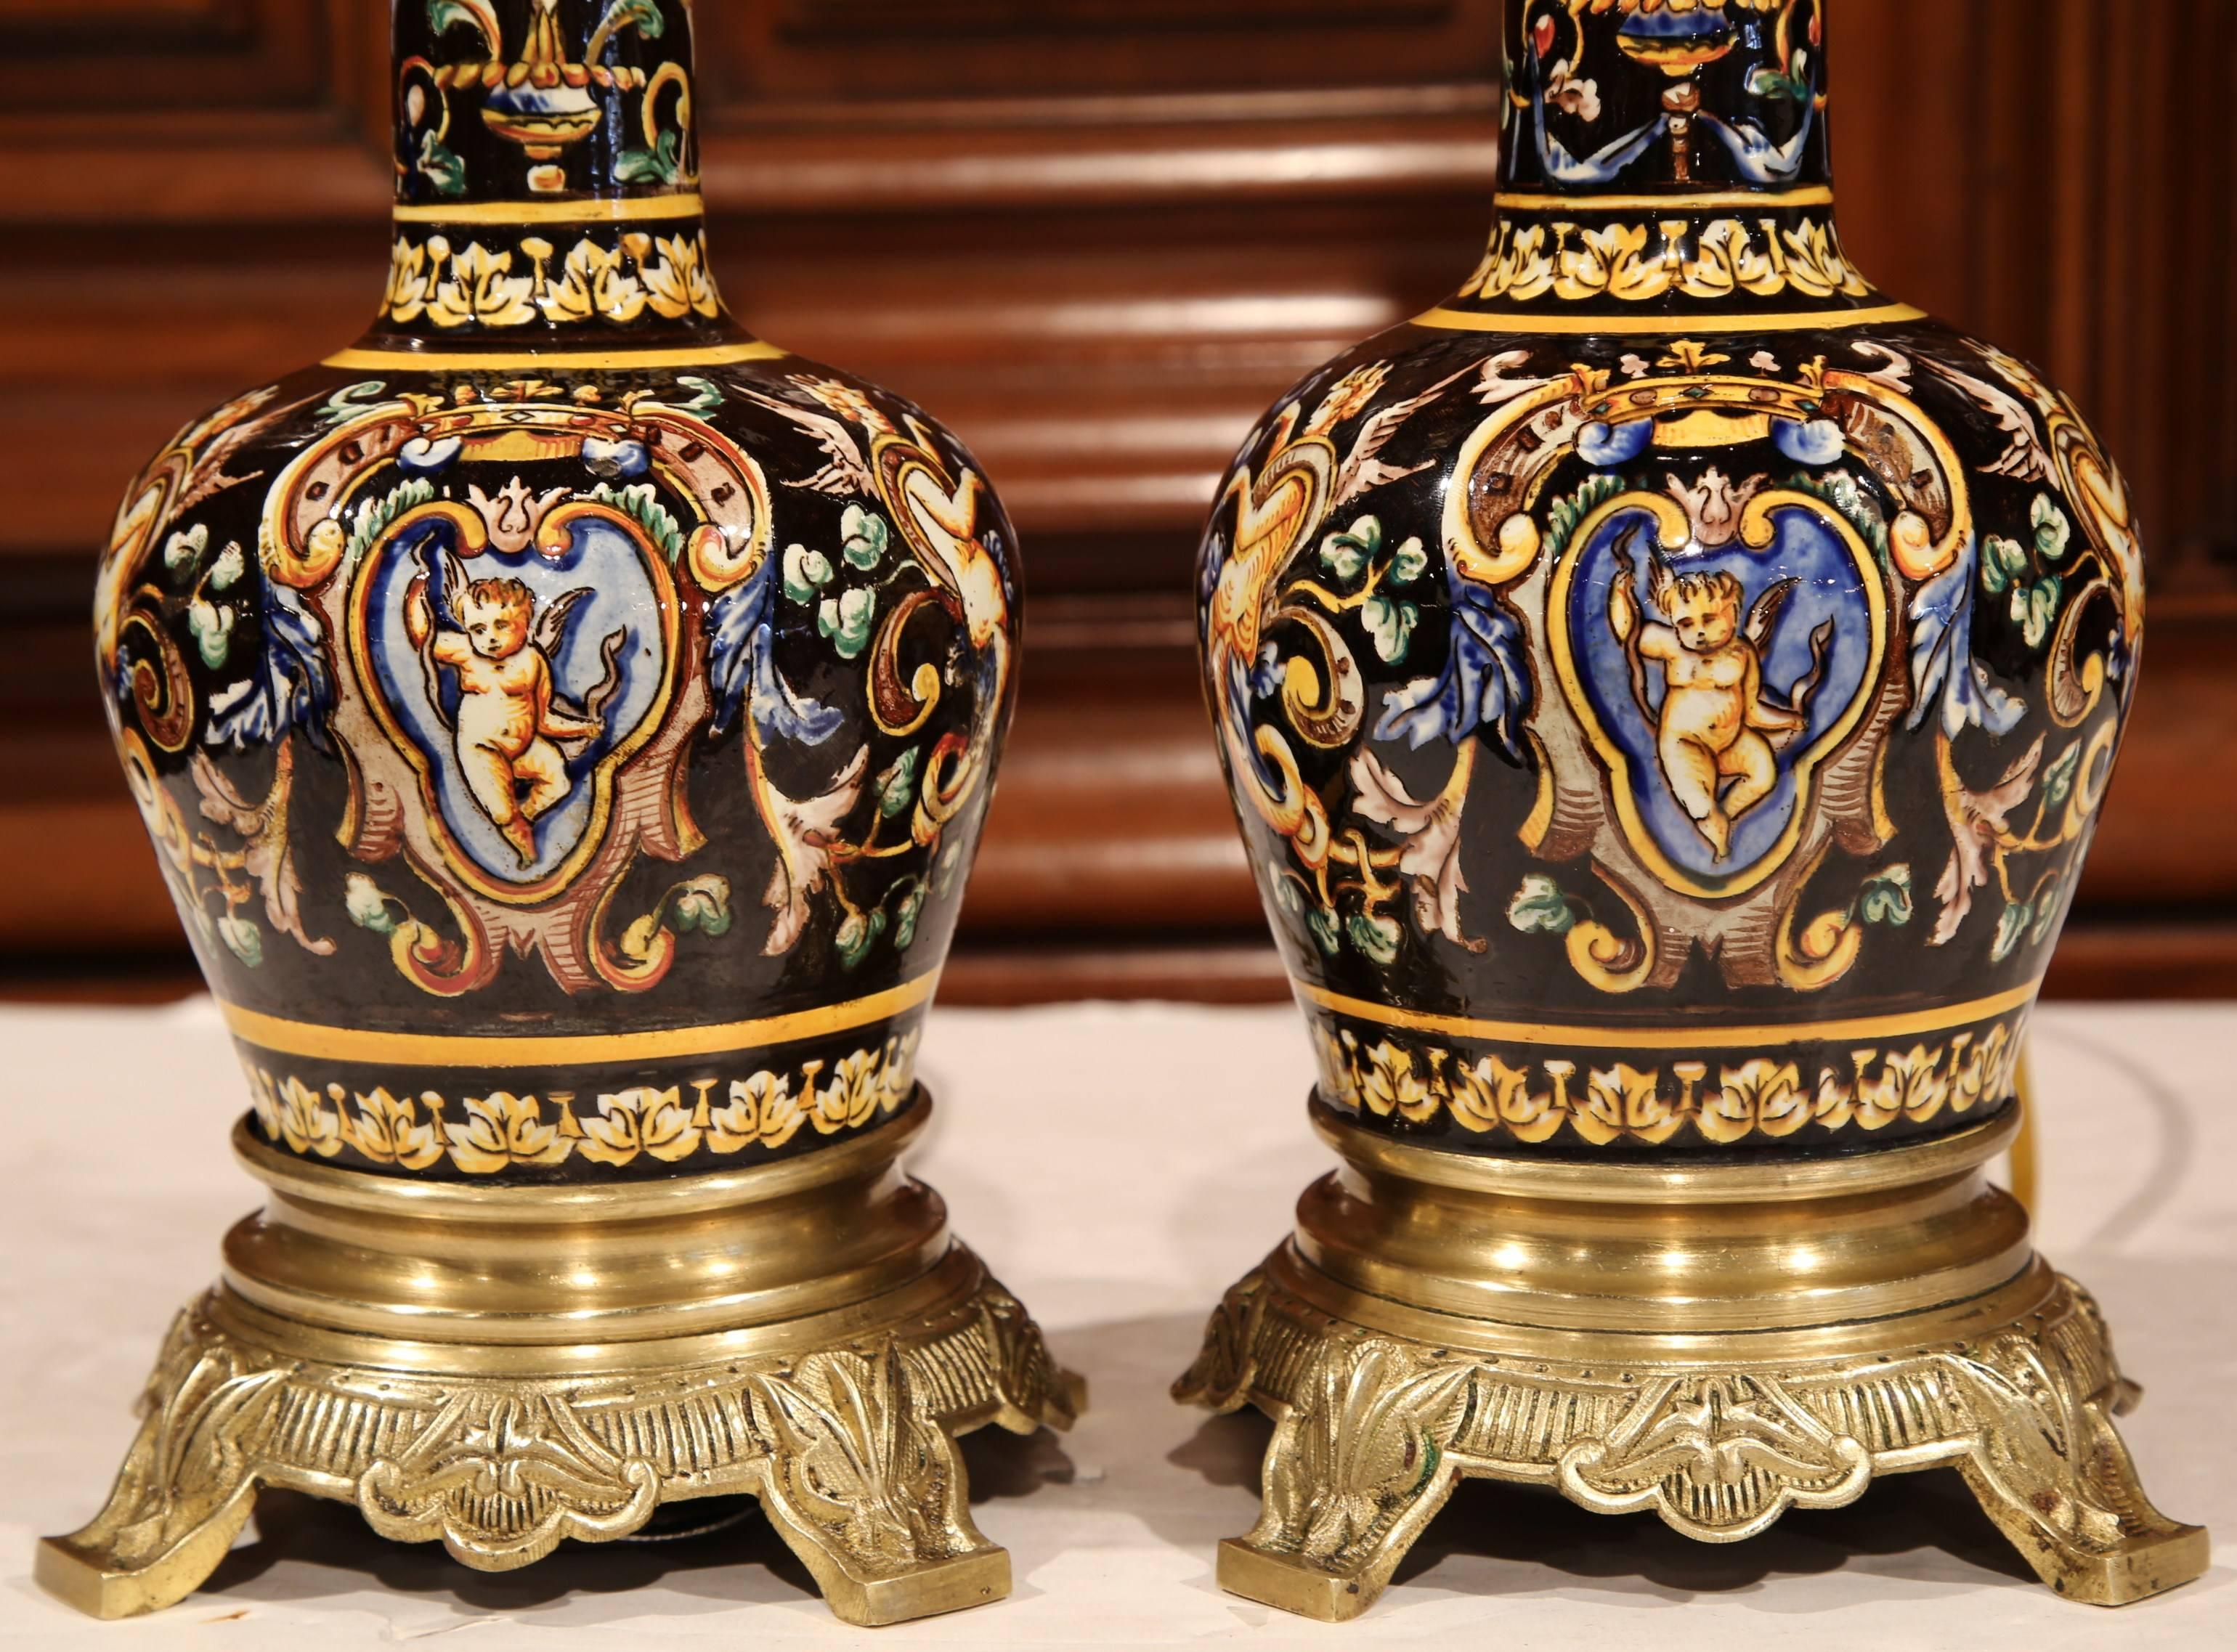 Hand-Crafted Pair of 19th Century French Hand-Painted Porcelain Oil Lamps with Bronze Mounts